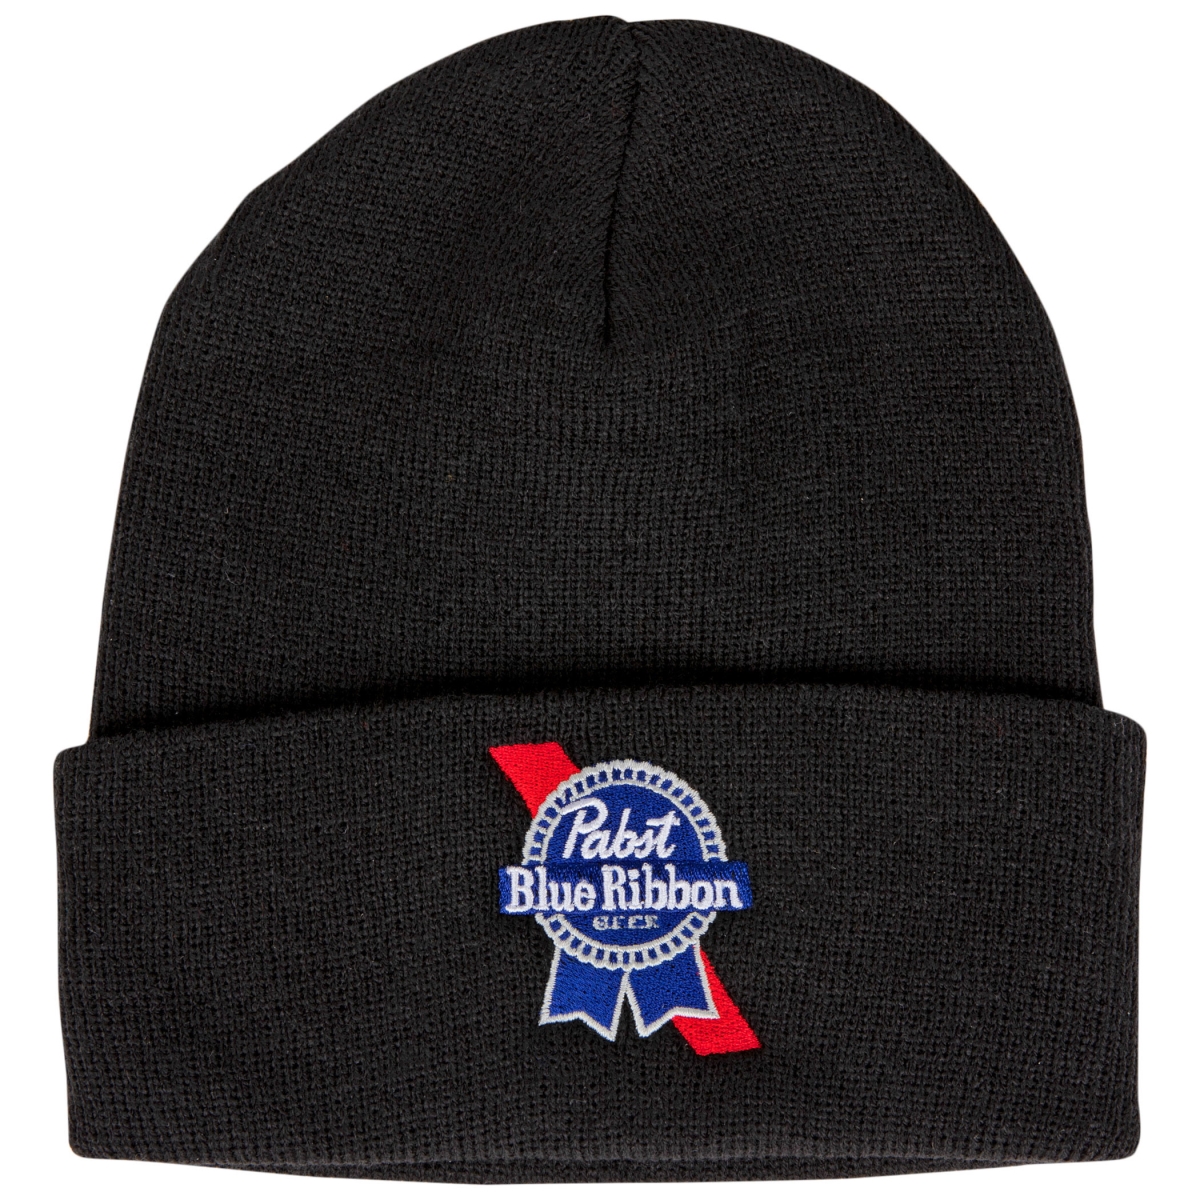 Picture of Pabst Blue Ribbon 834842 Beer Logo Cuffed Knit Beanie